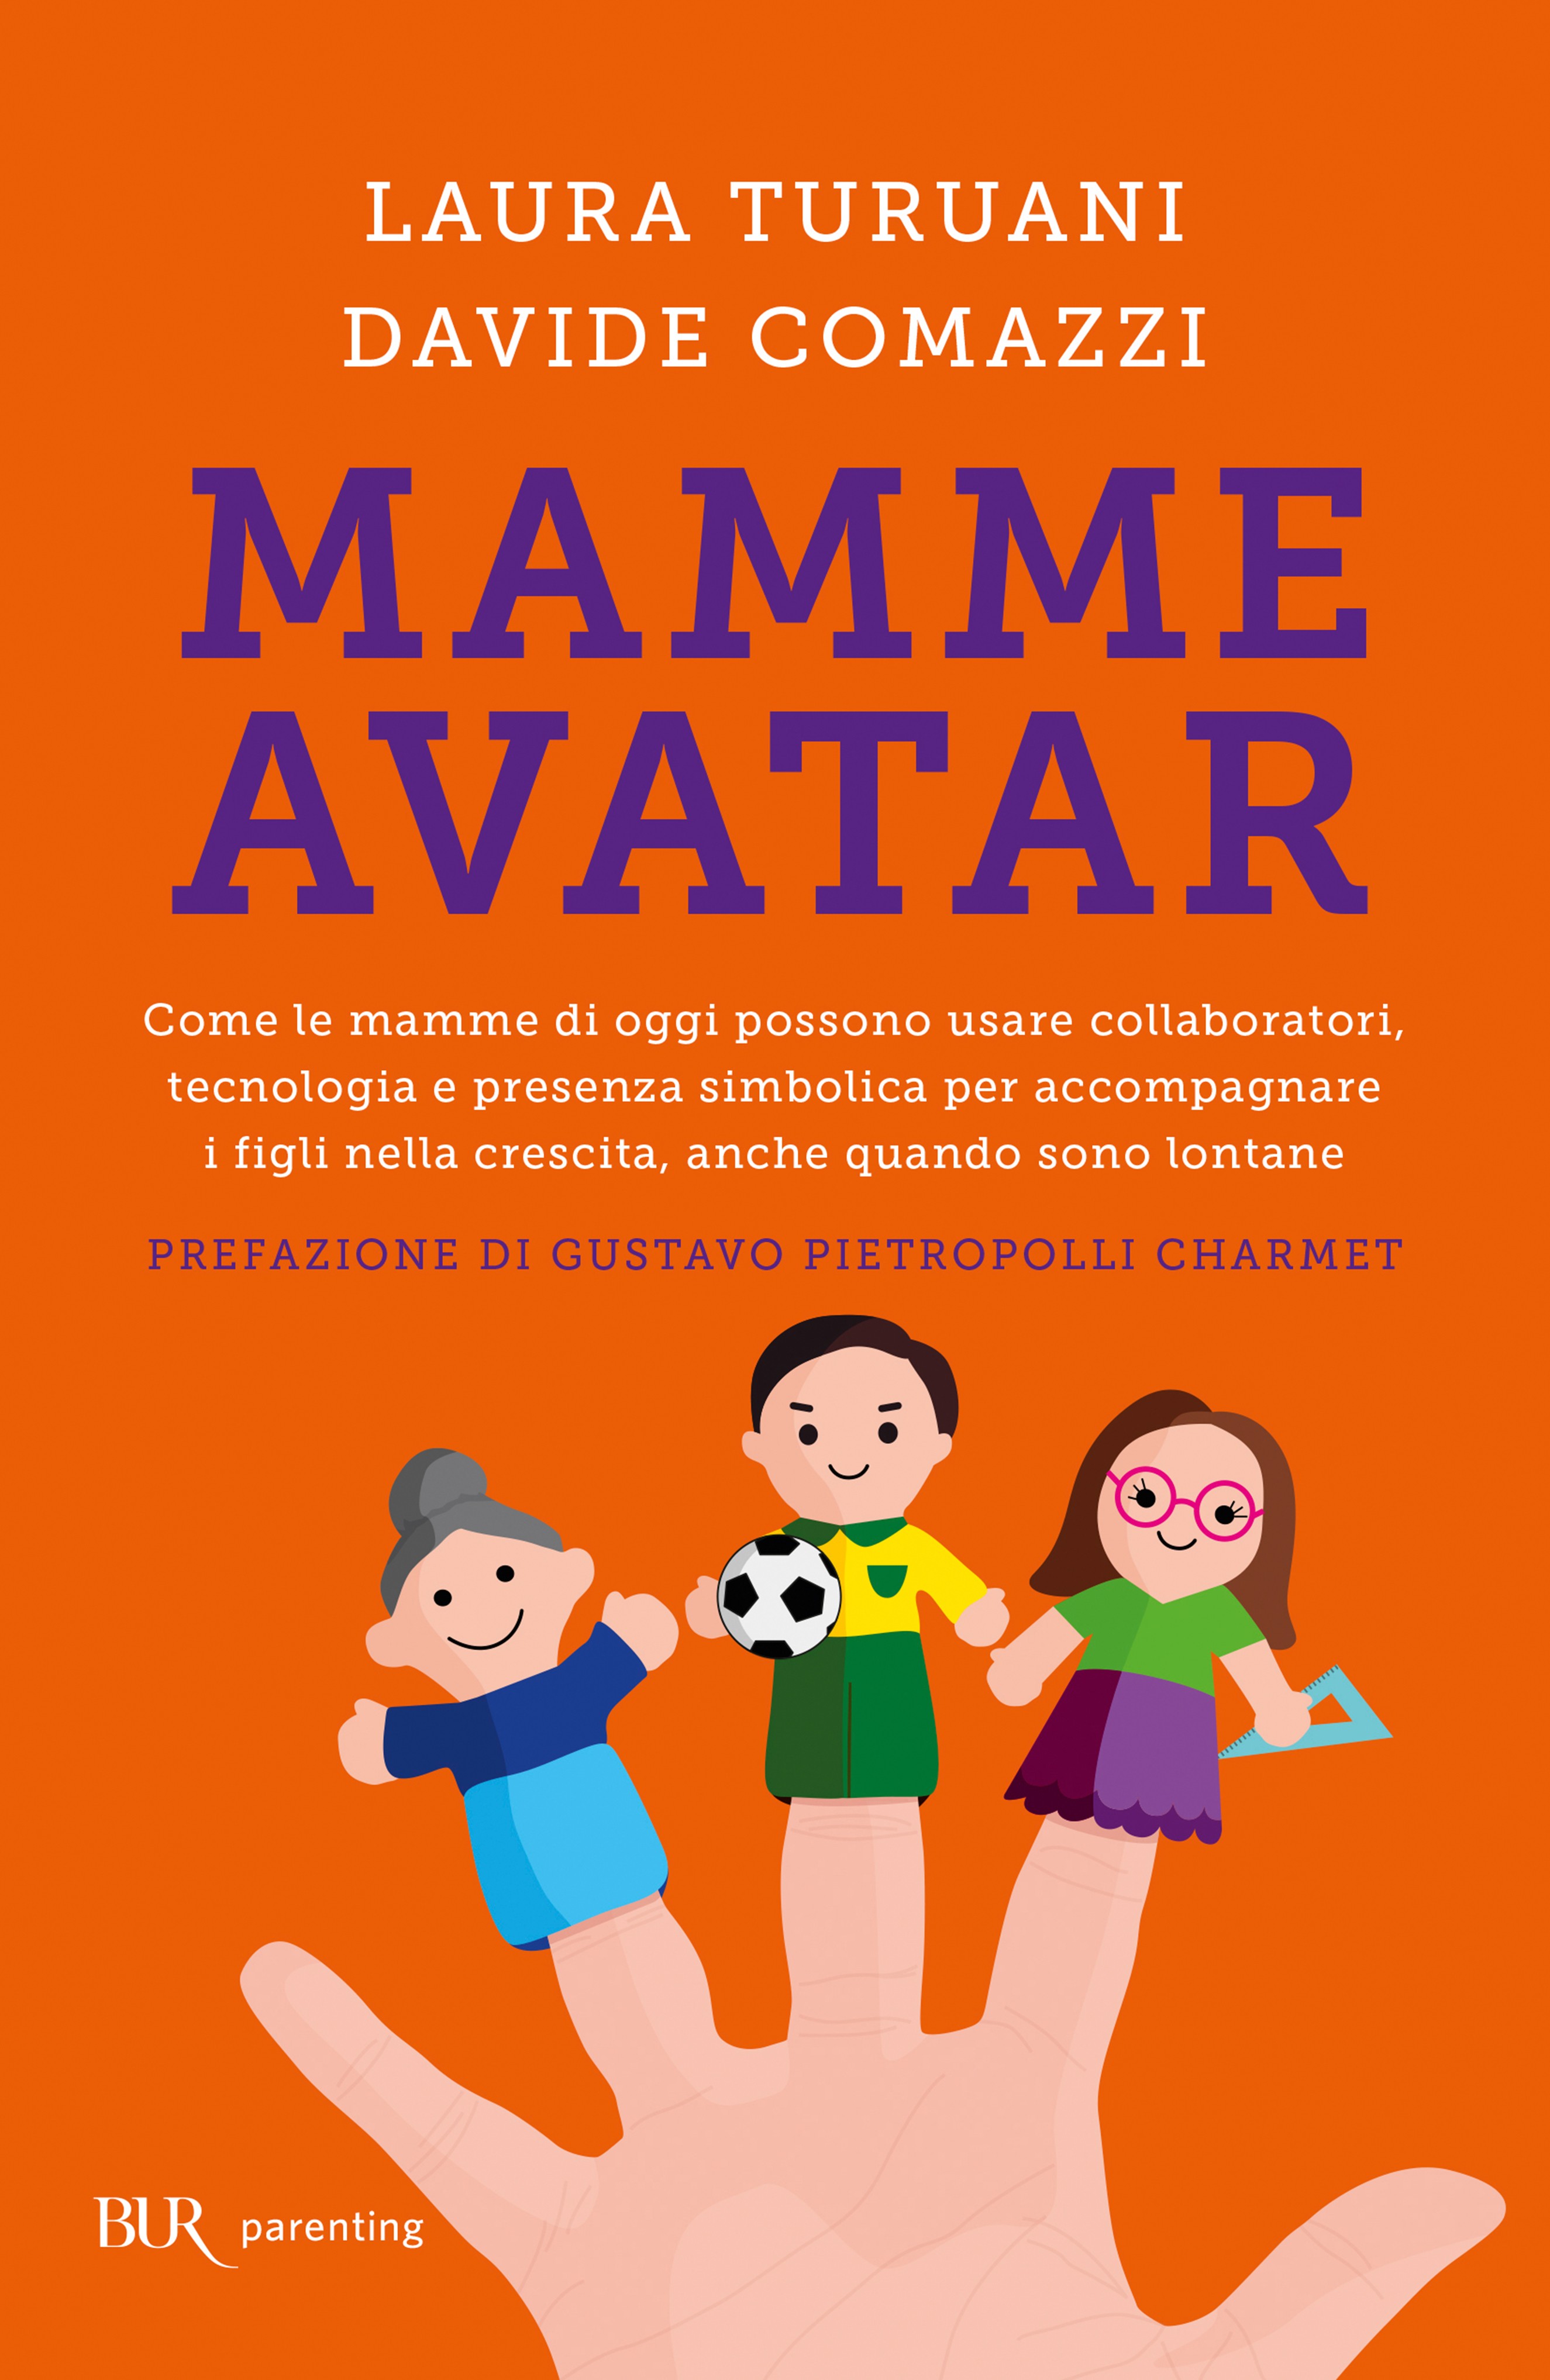 Mamme avatar - Librerie.coop